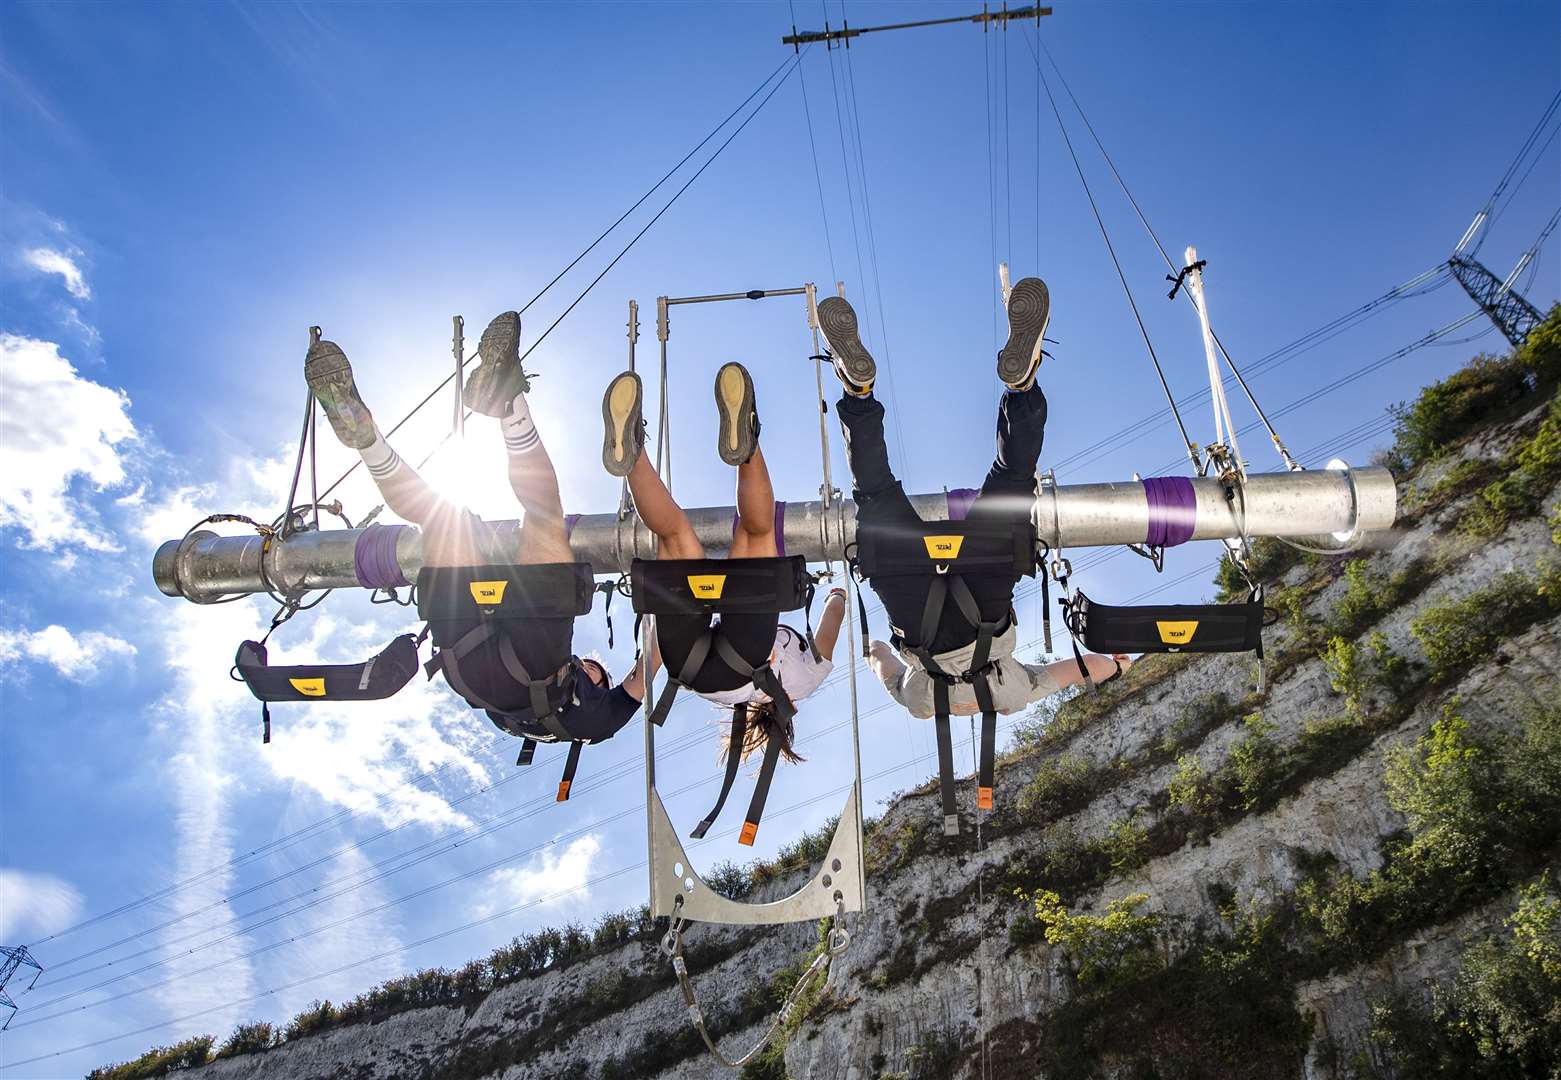 Giant Swing at Hangloose Adventure Bluewater. Picture: John Nguyen/PA Wire